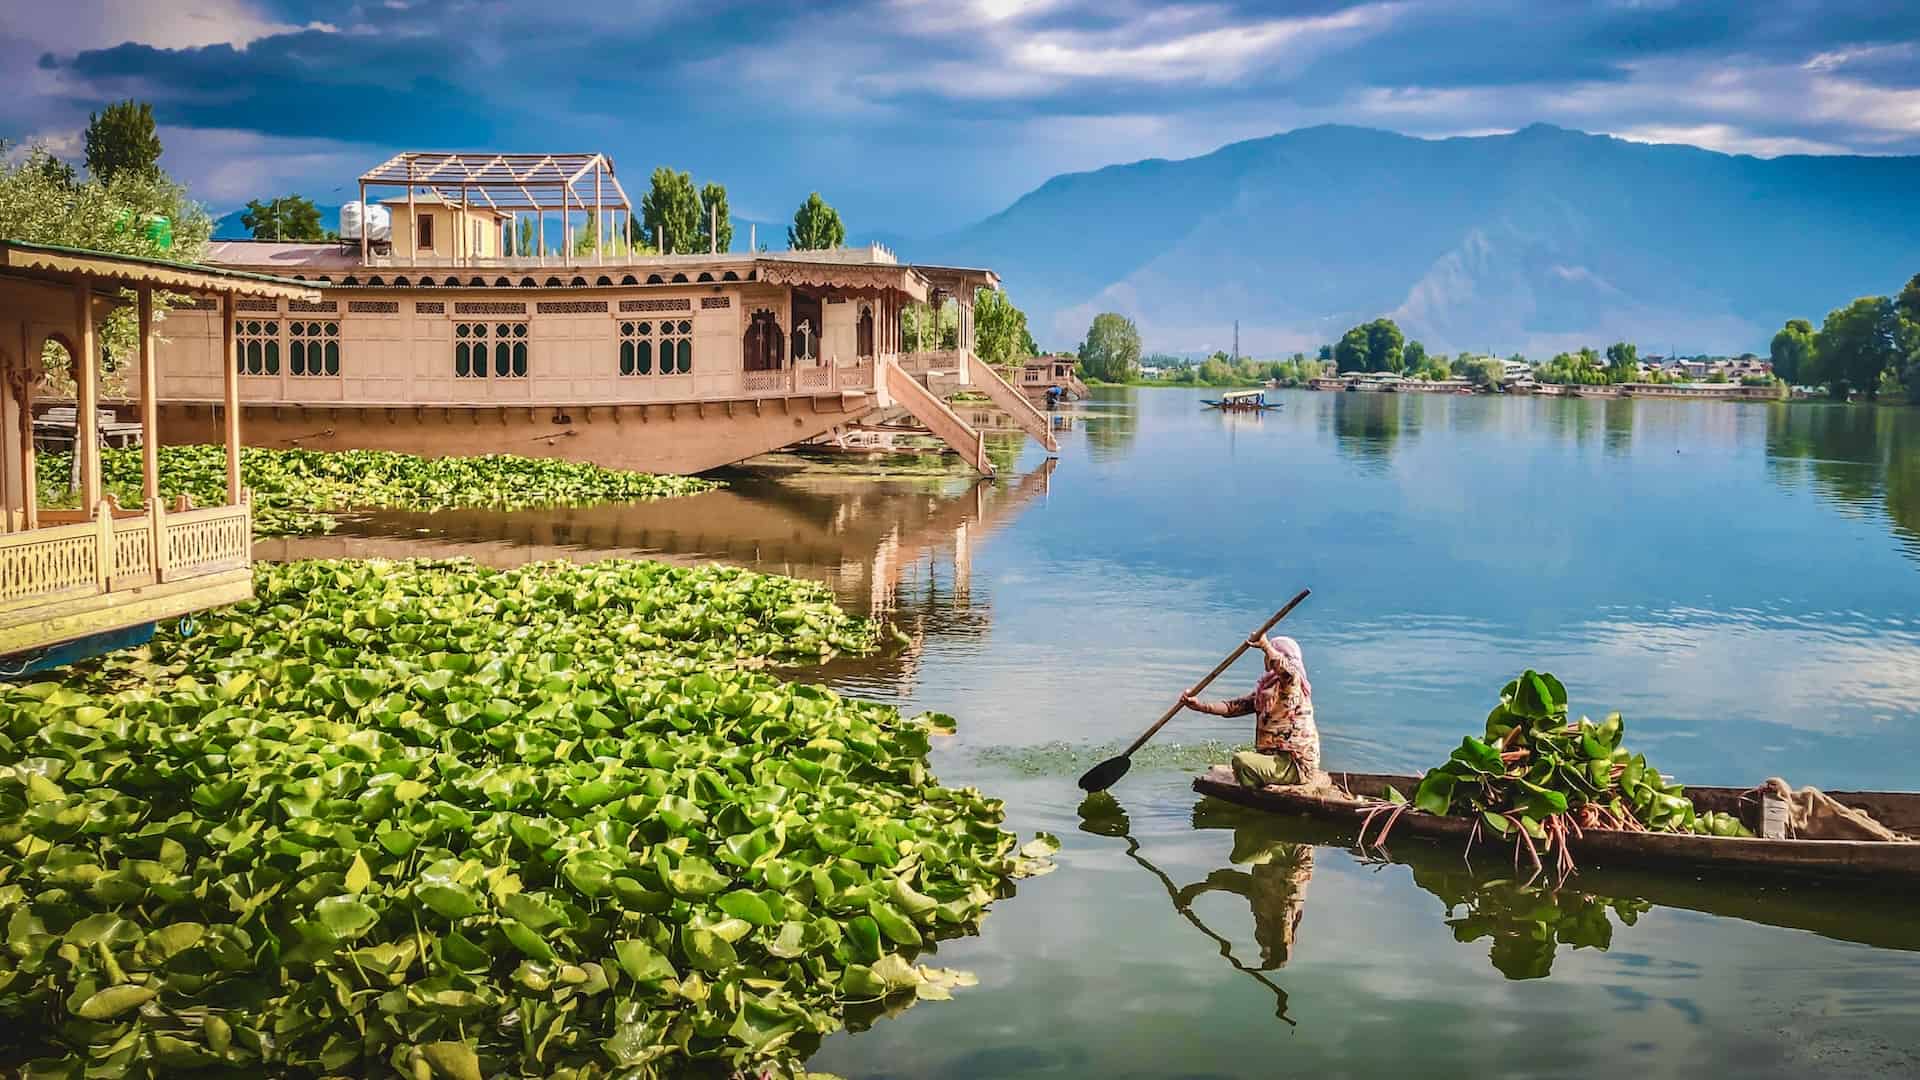 srinagar in kashmir india is one of the highest cities in the world